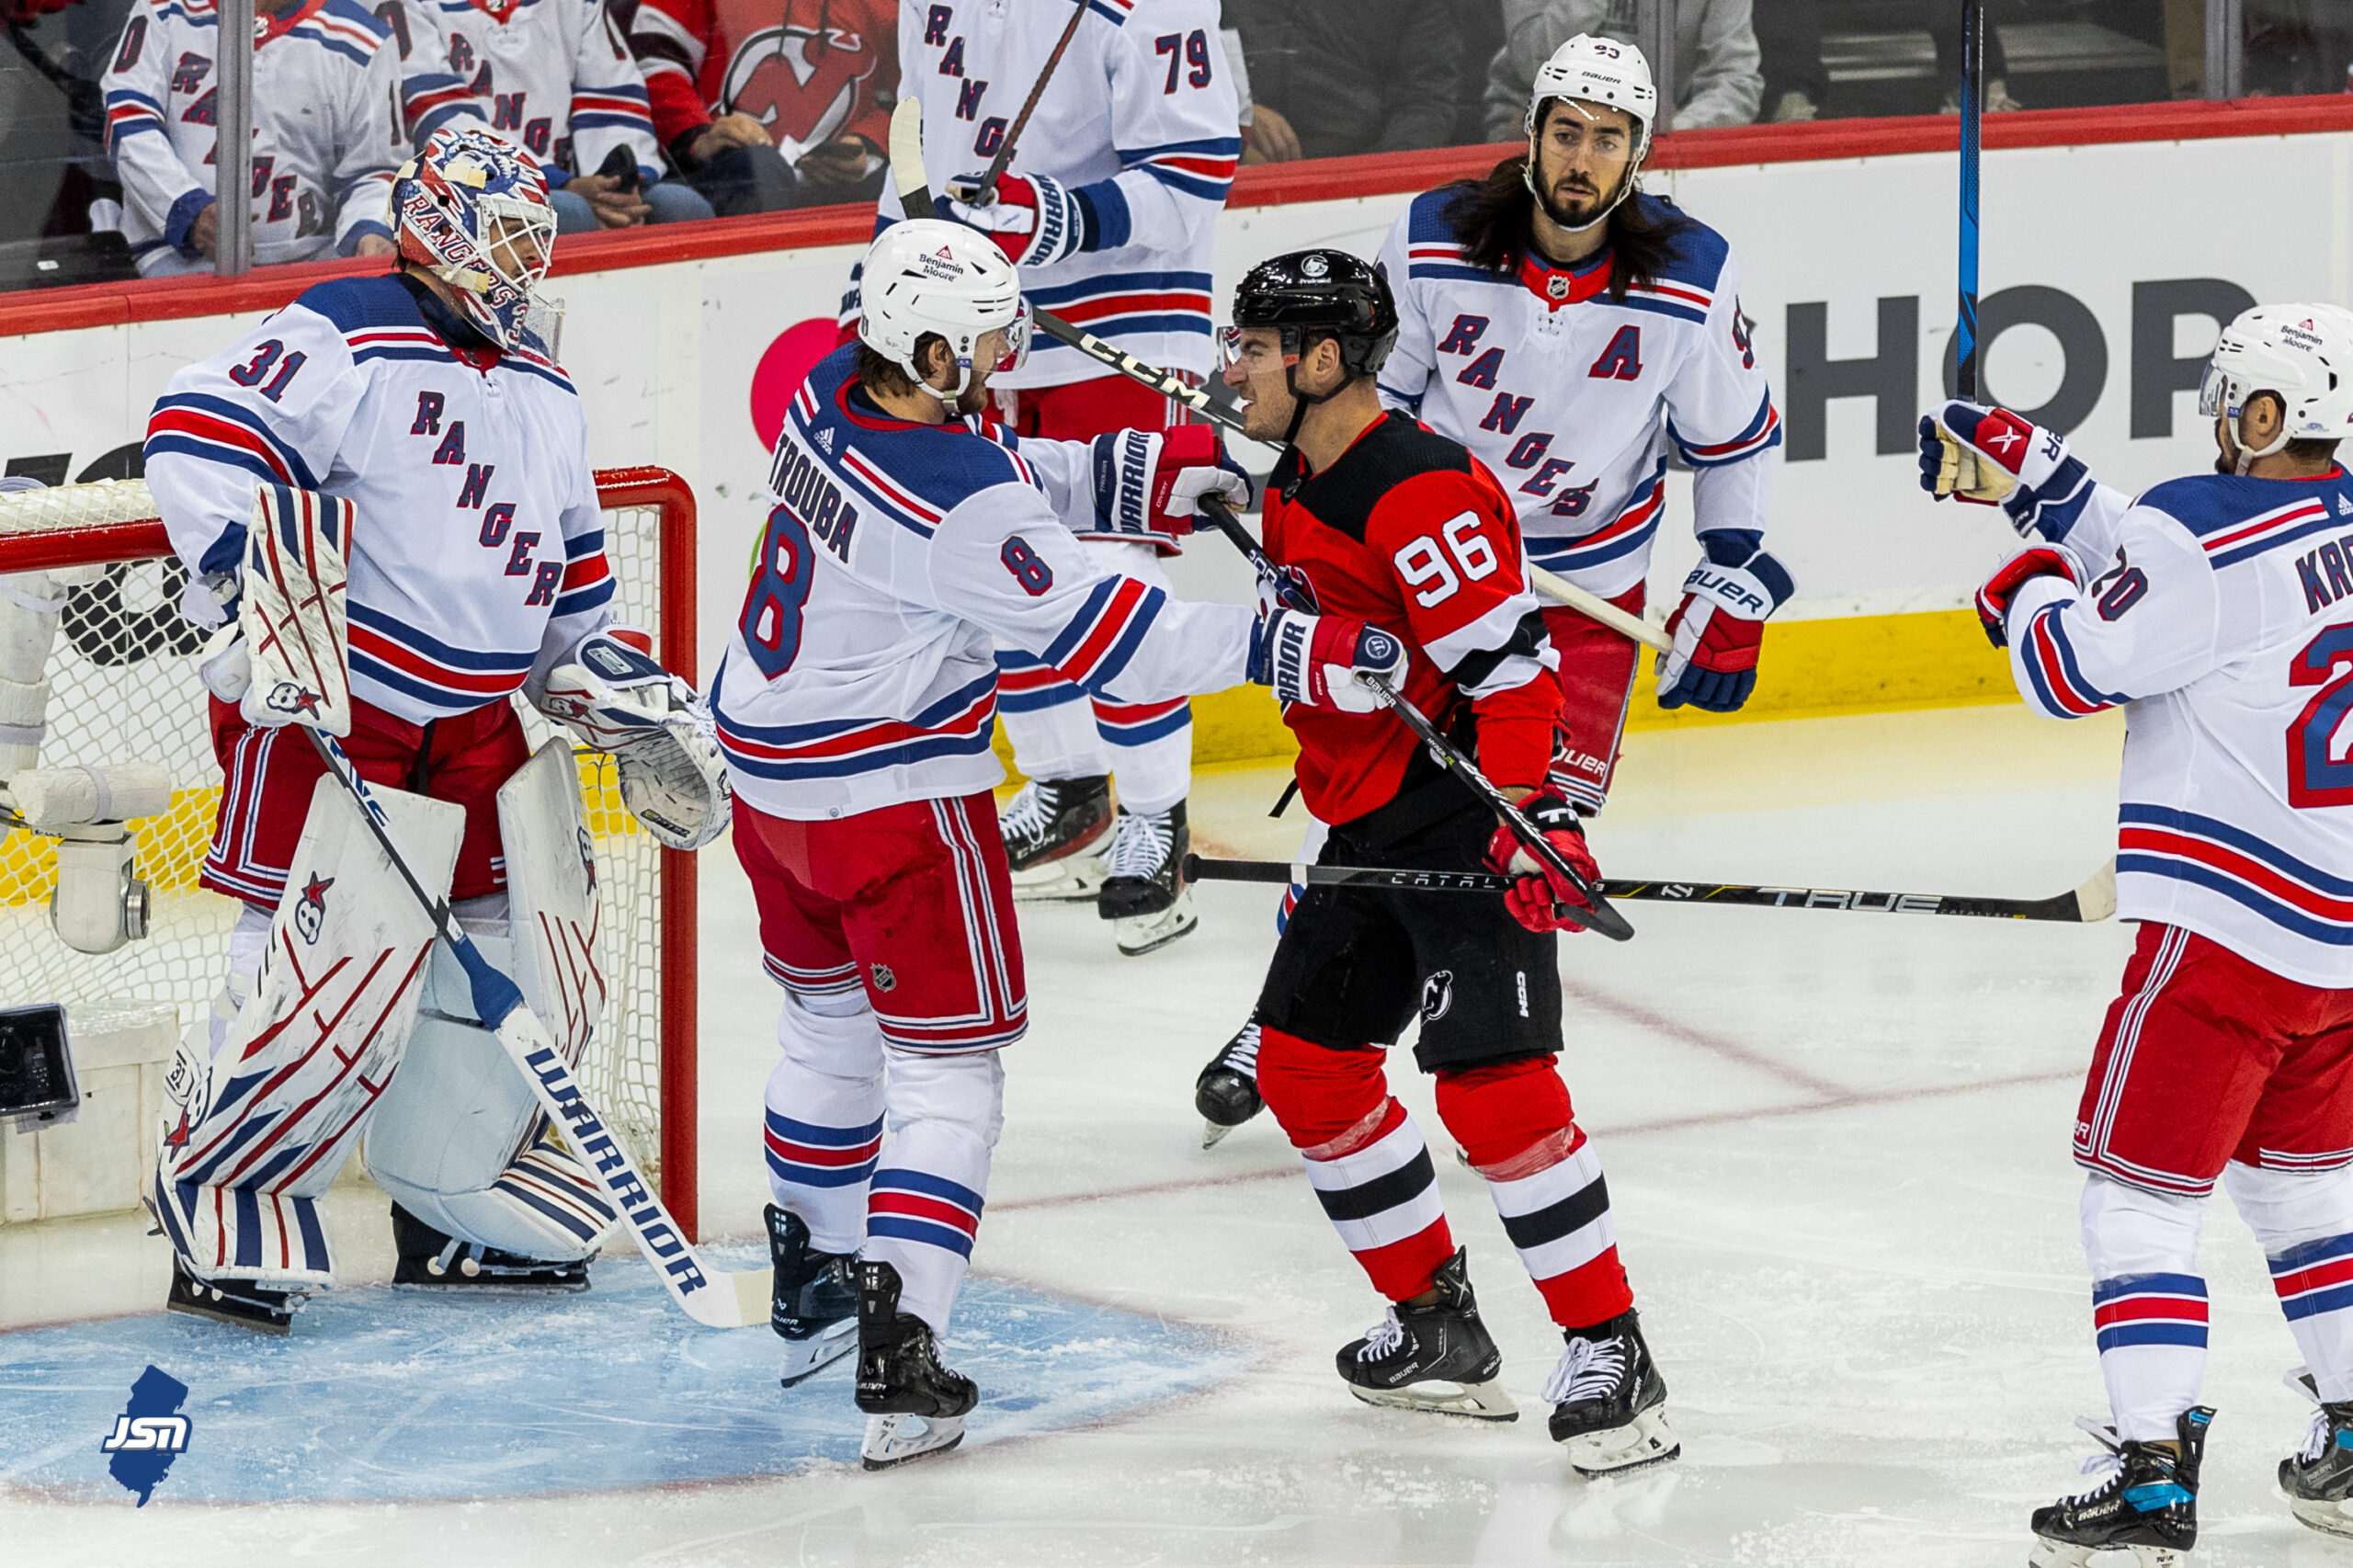 Devils stun Rangers in OT in Game 3 to get back into series